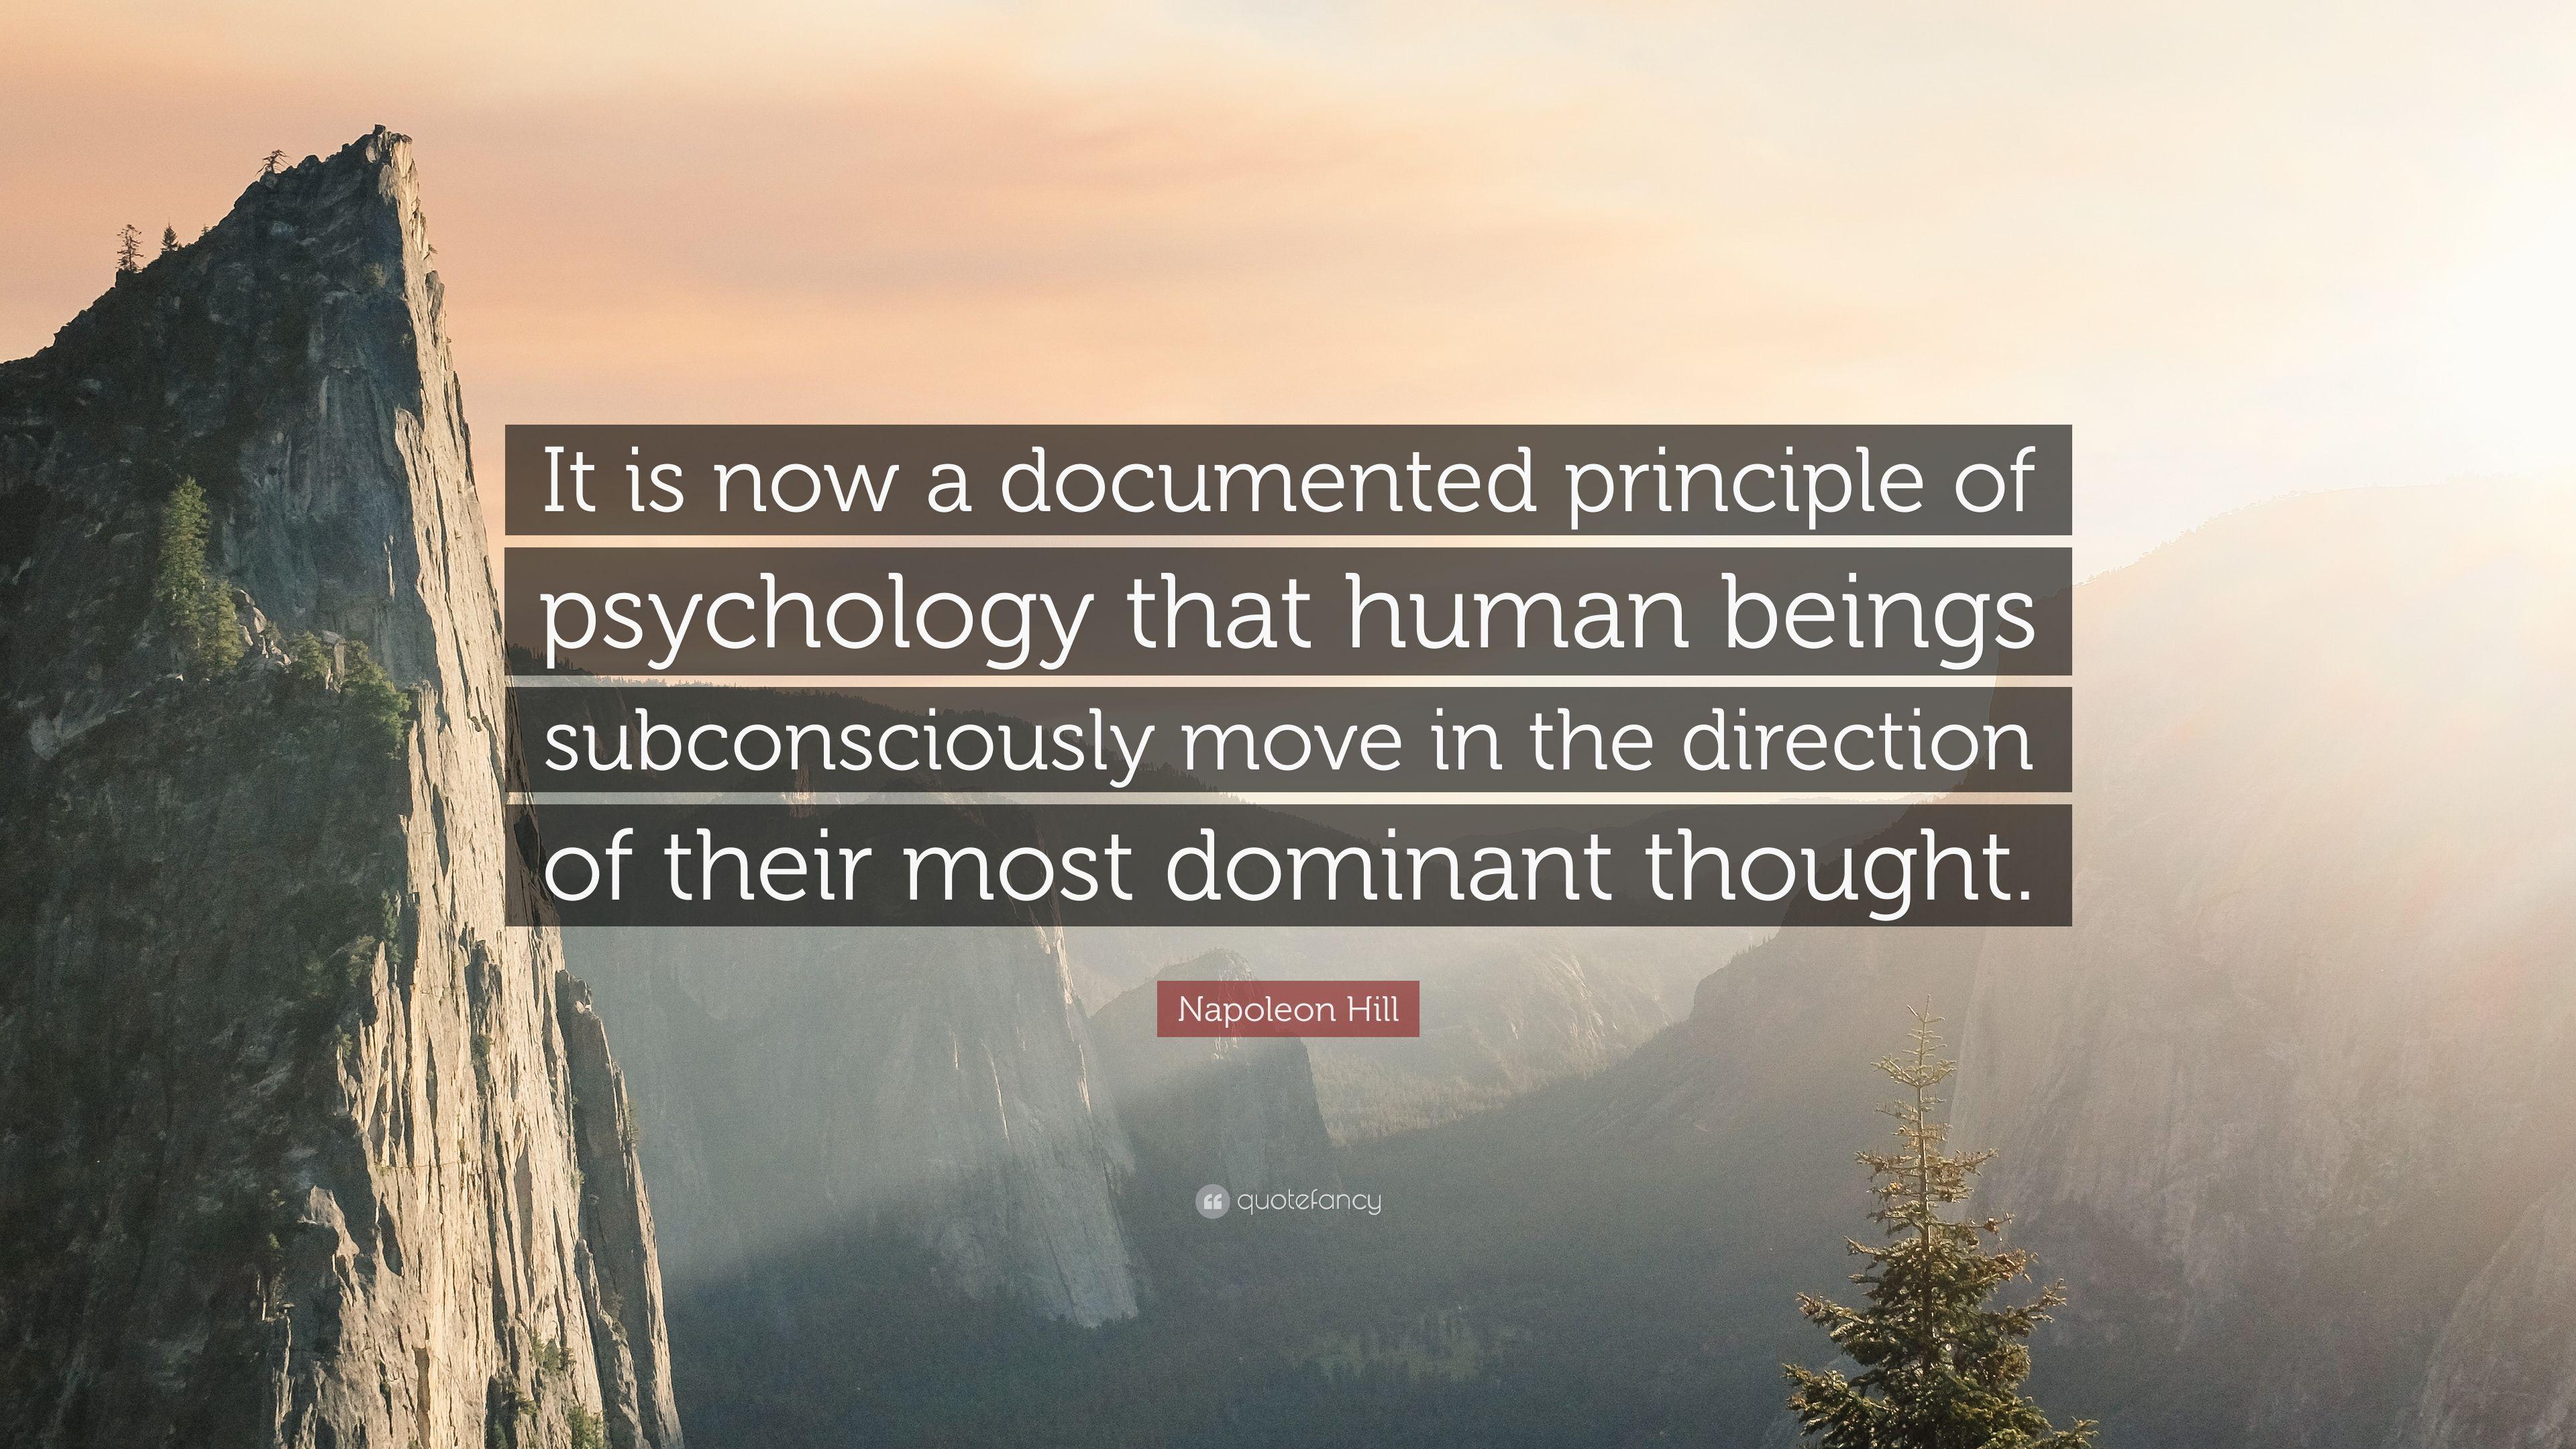 Napoleon Hill Quote: “It is now a documented principle